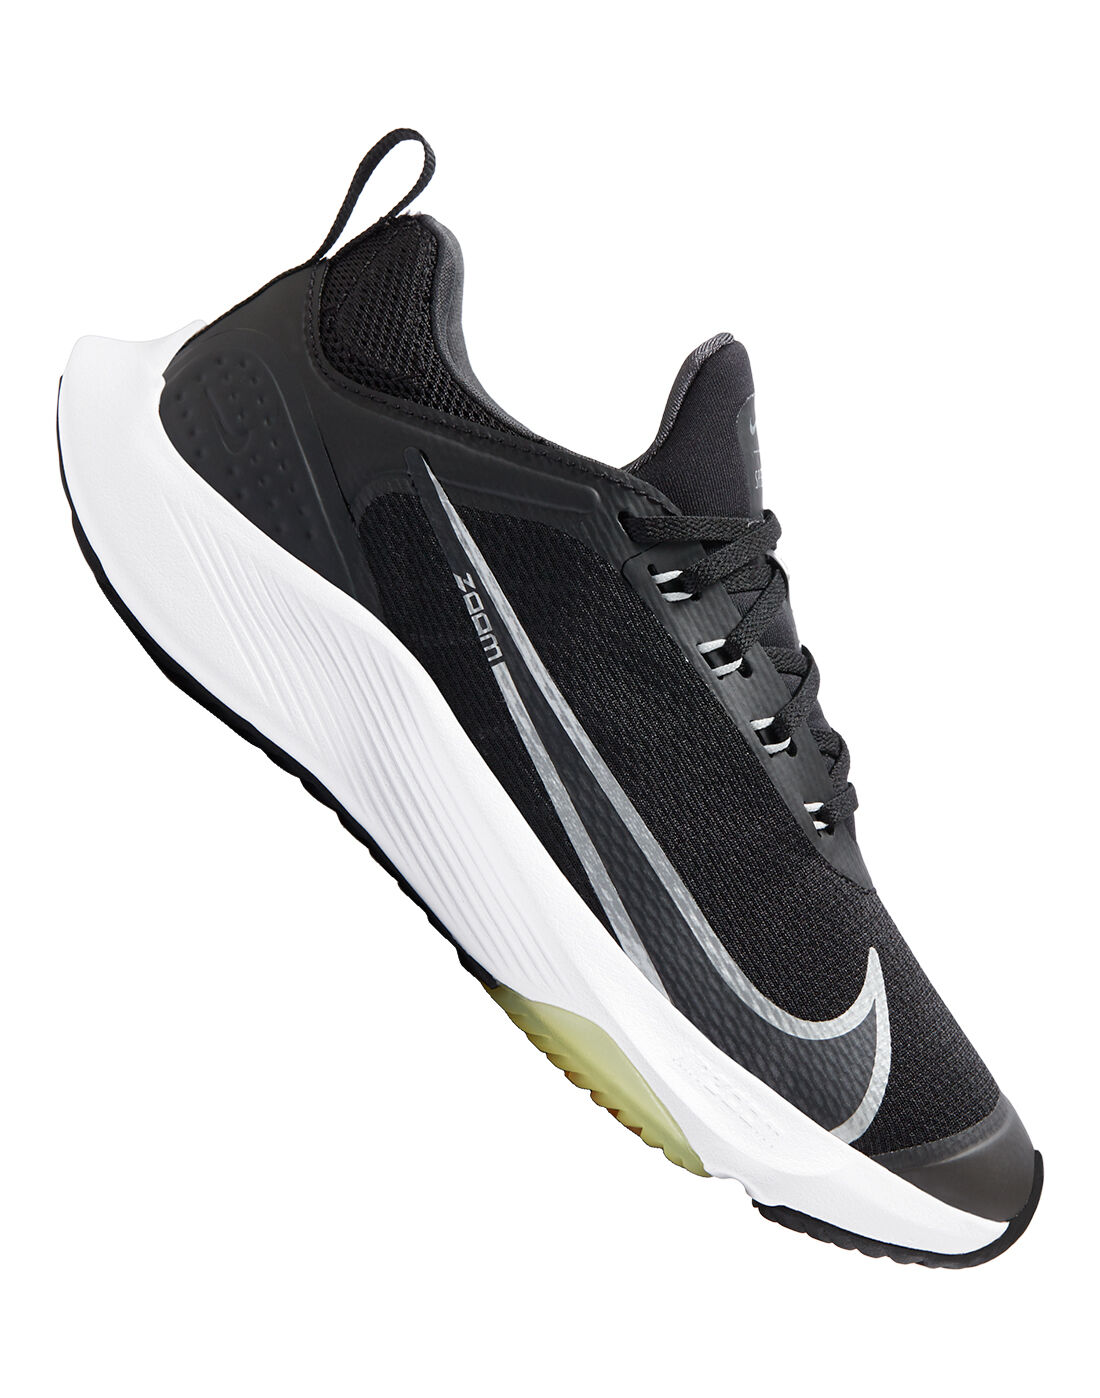 Nike Older Kids Air Zoom Speed - Black | Life Style Sports EU افضل ستائر رول